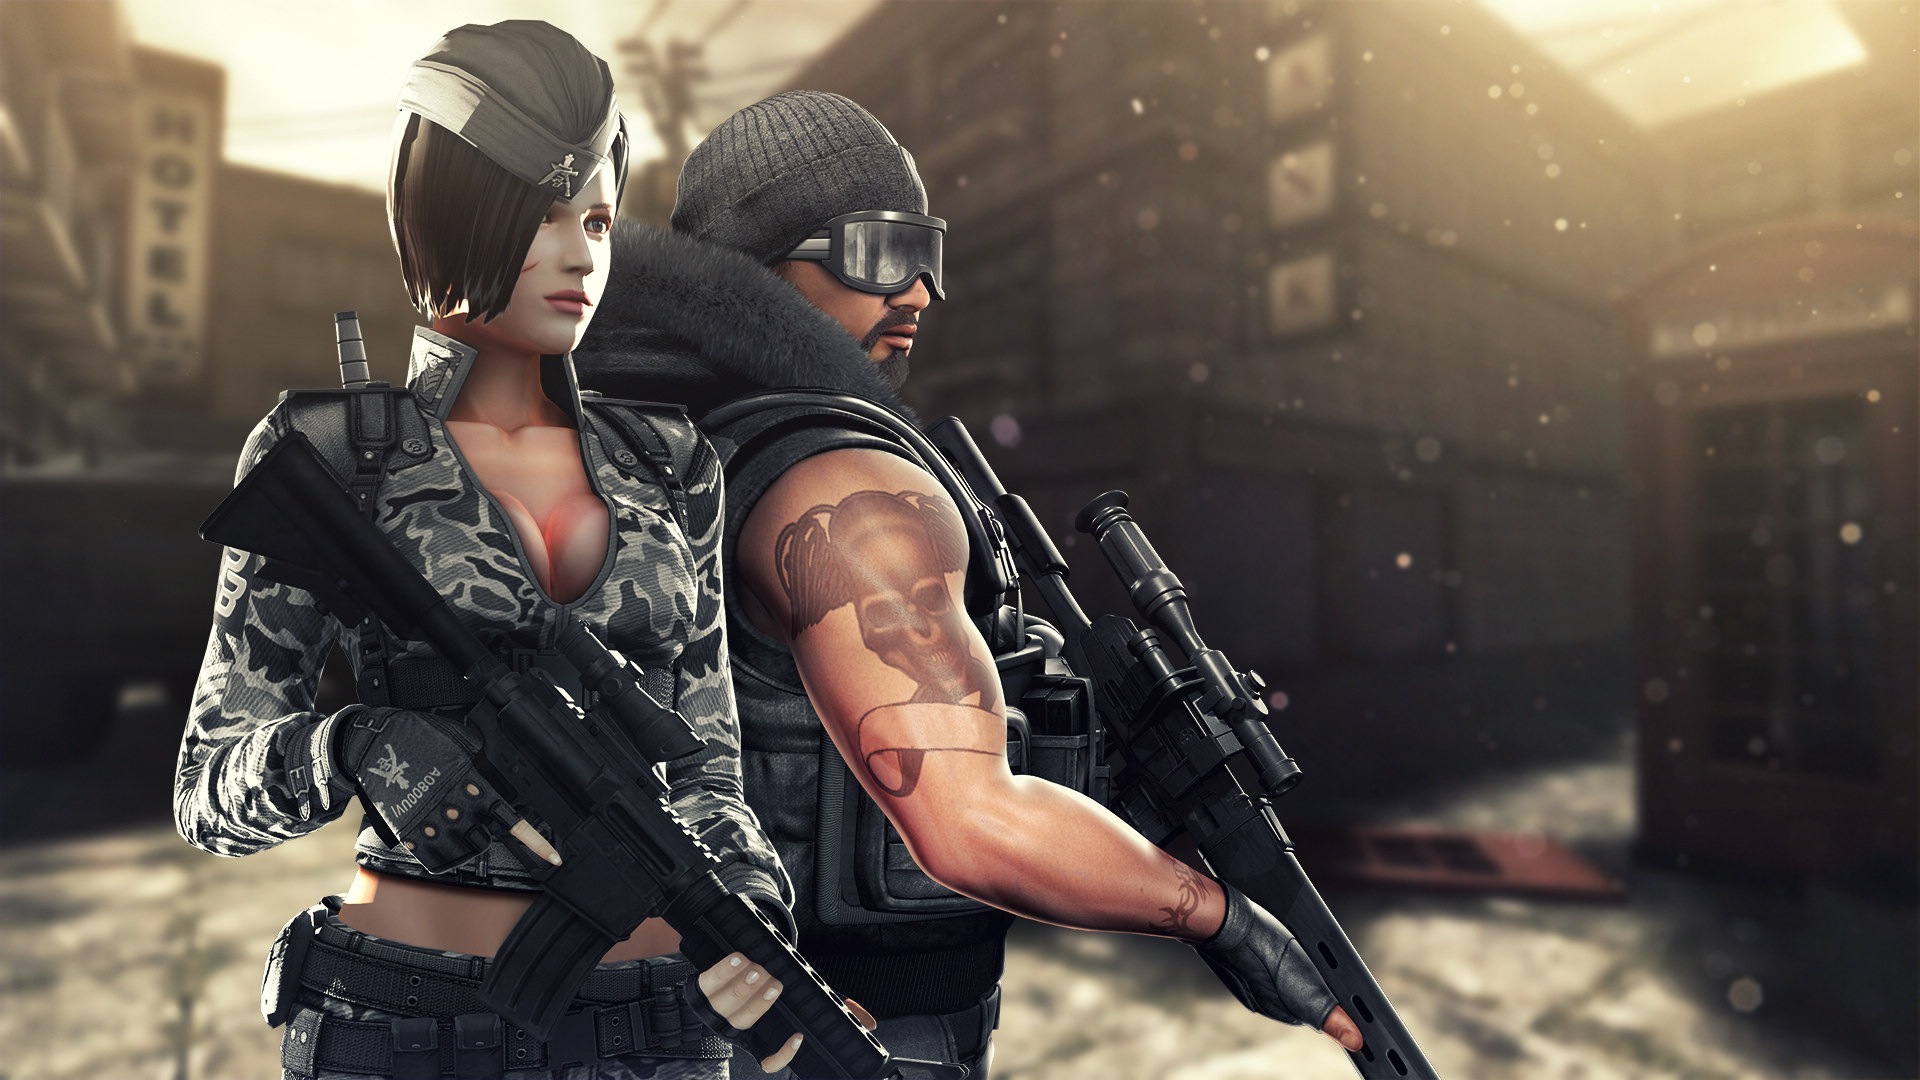 Point Blank HD game wallpapers #9 - 1920x1080